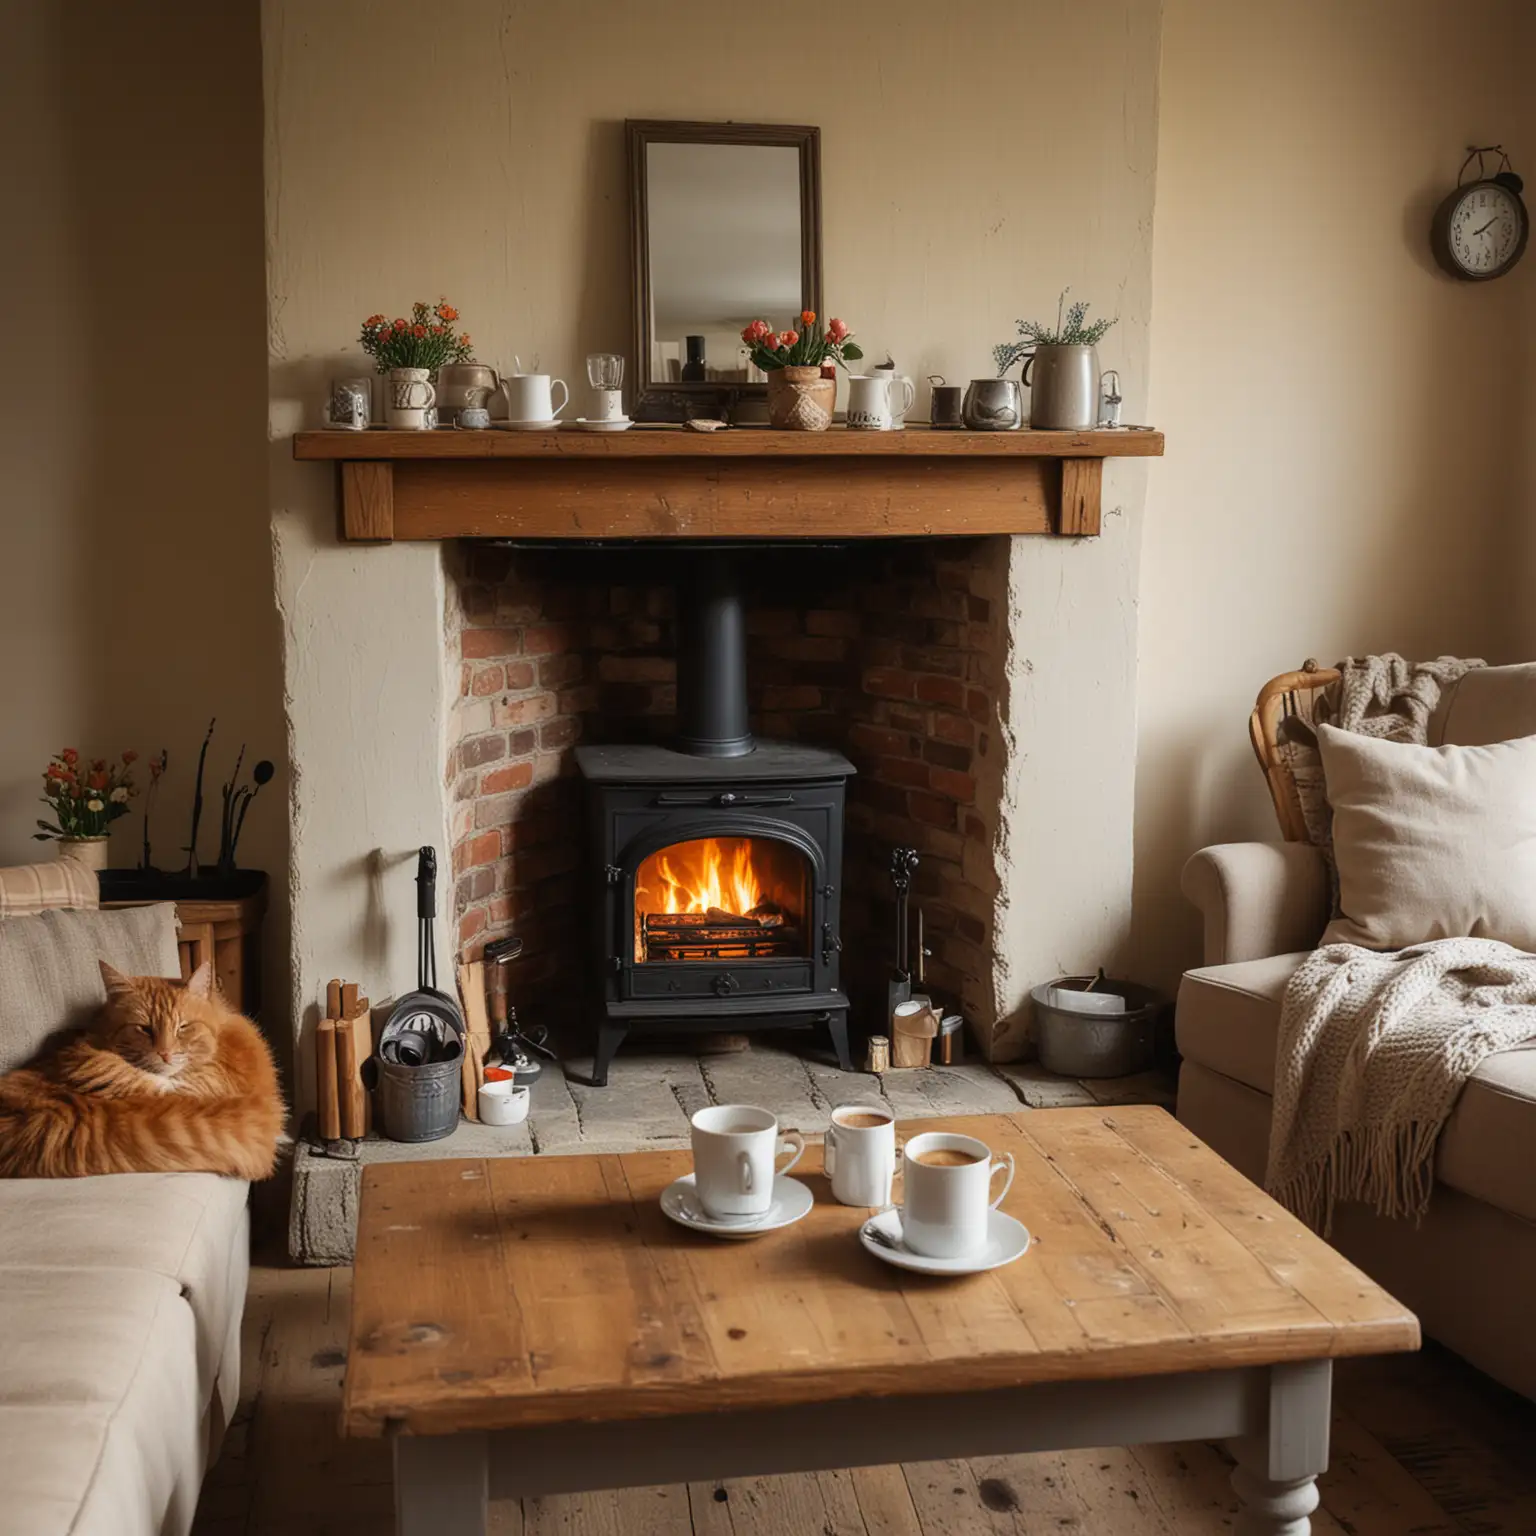 Cozy Country Cottage Fireplace with Coffee Cups and a Cat